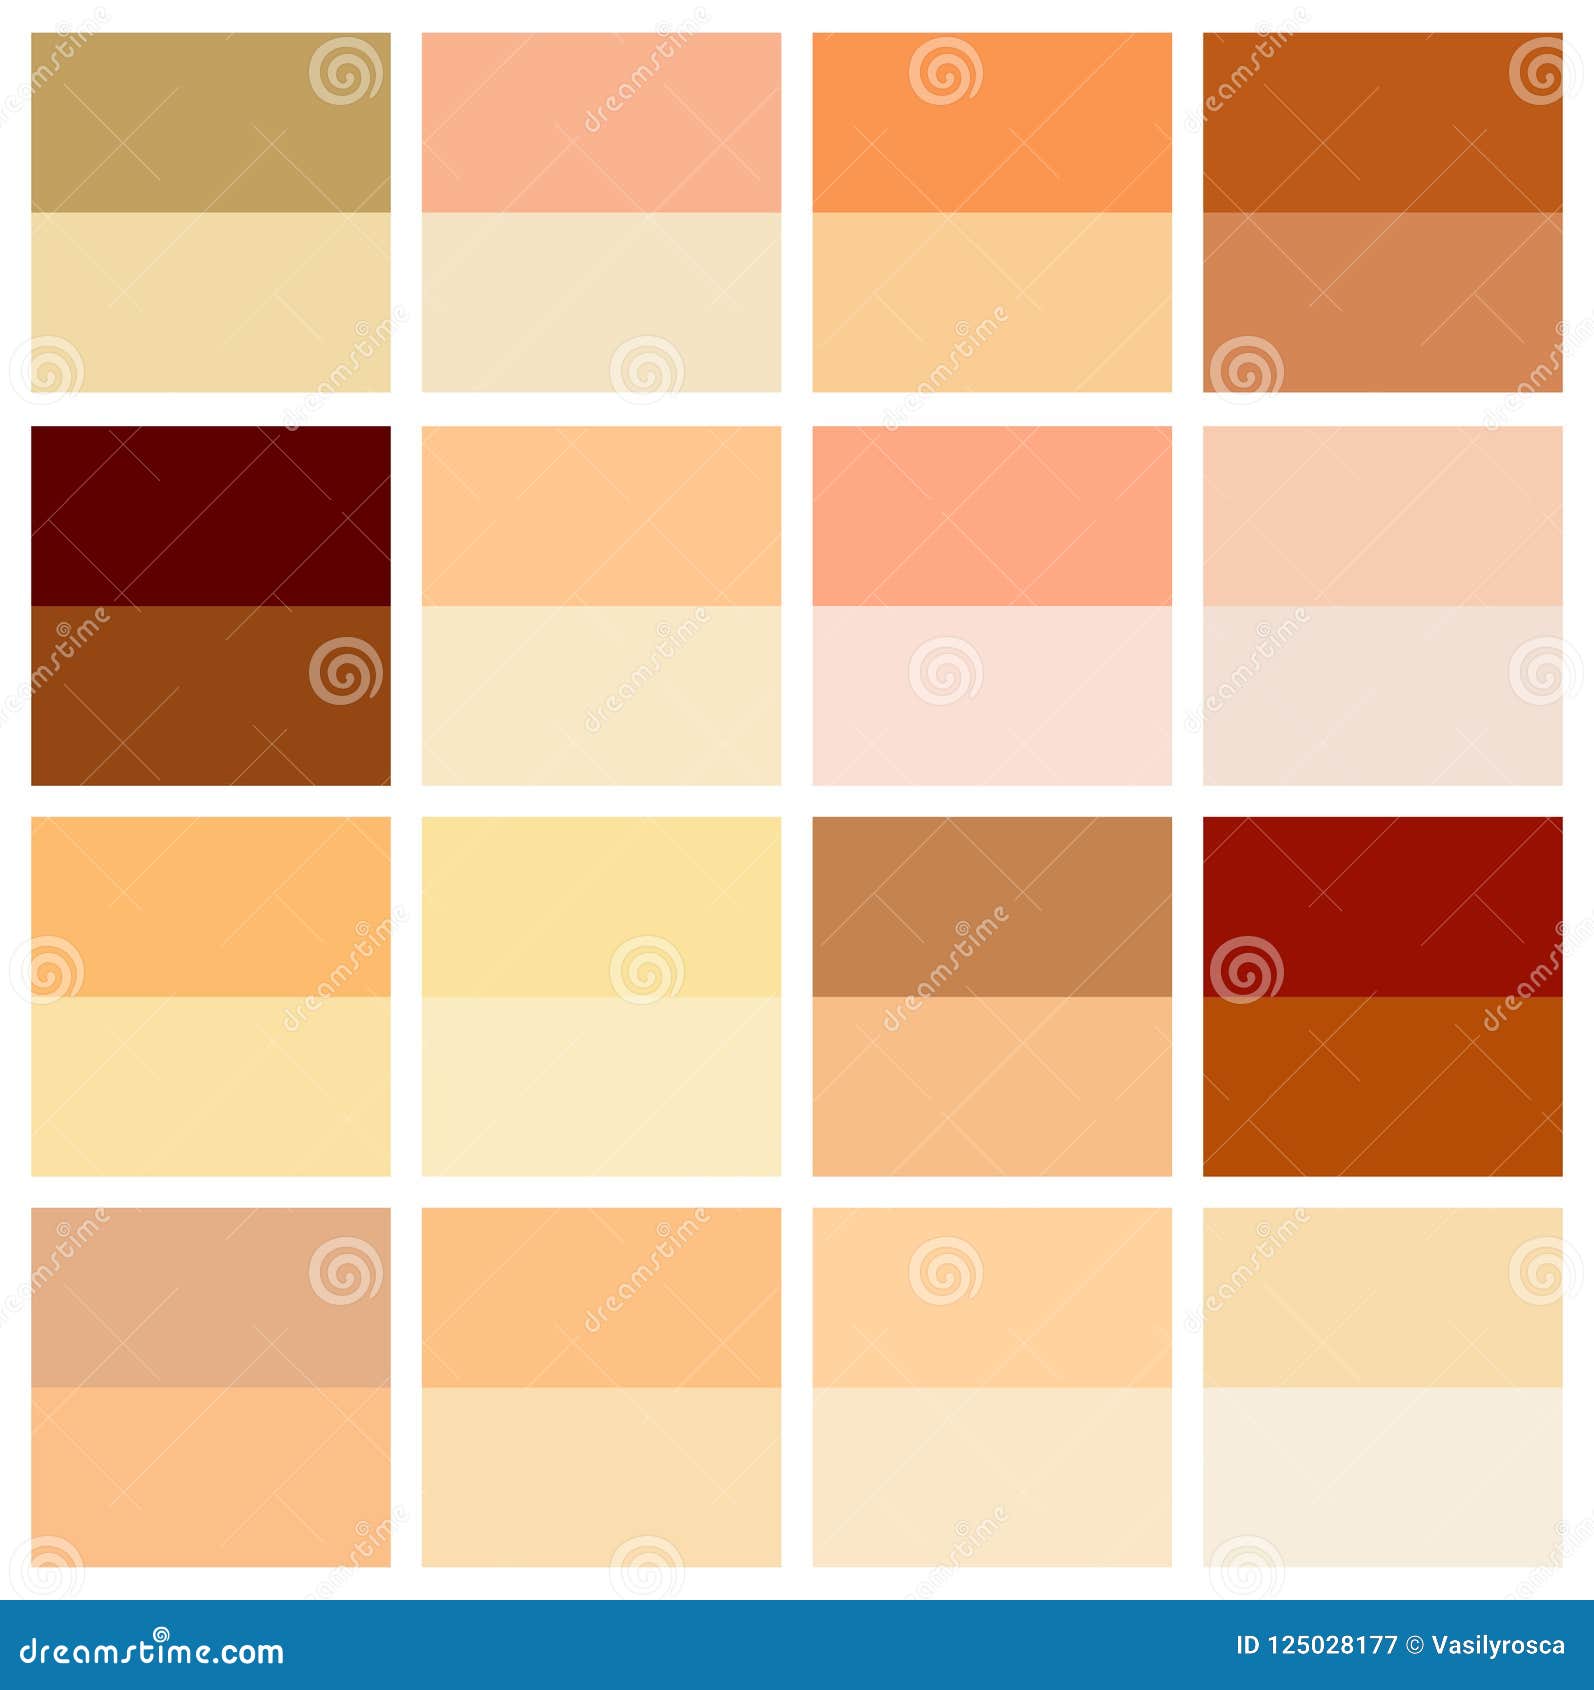 Skin Complexion Color Chart